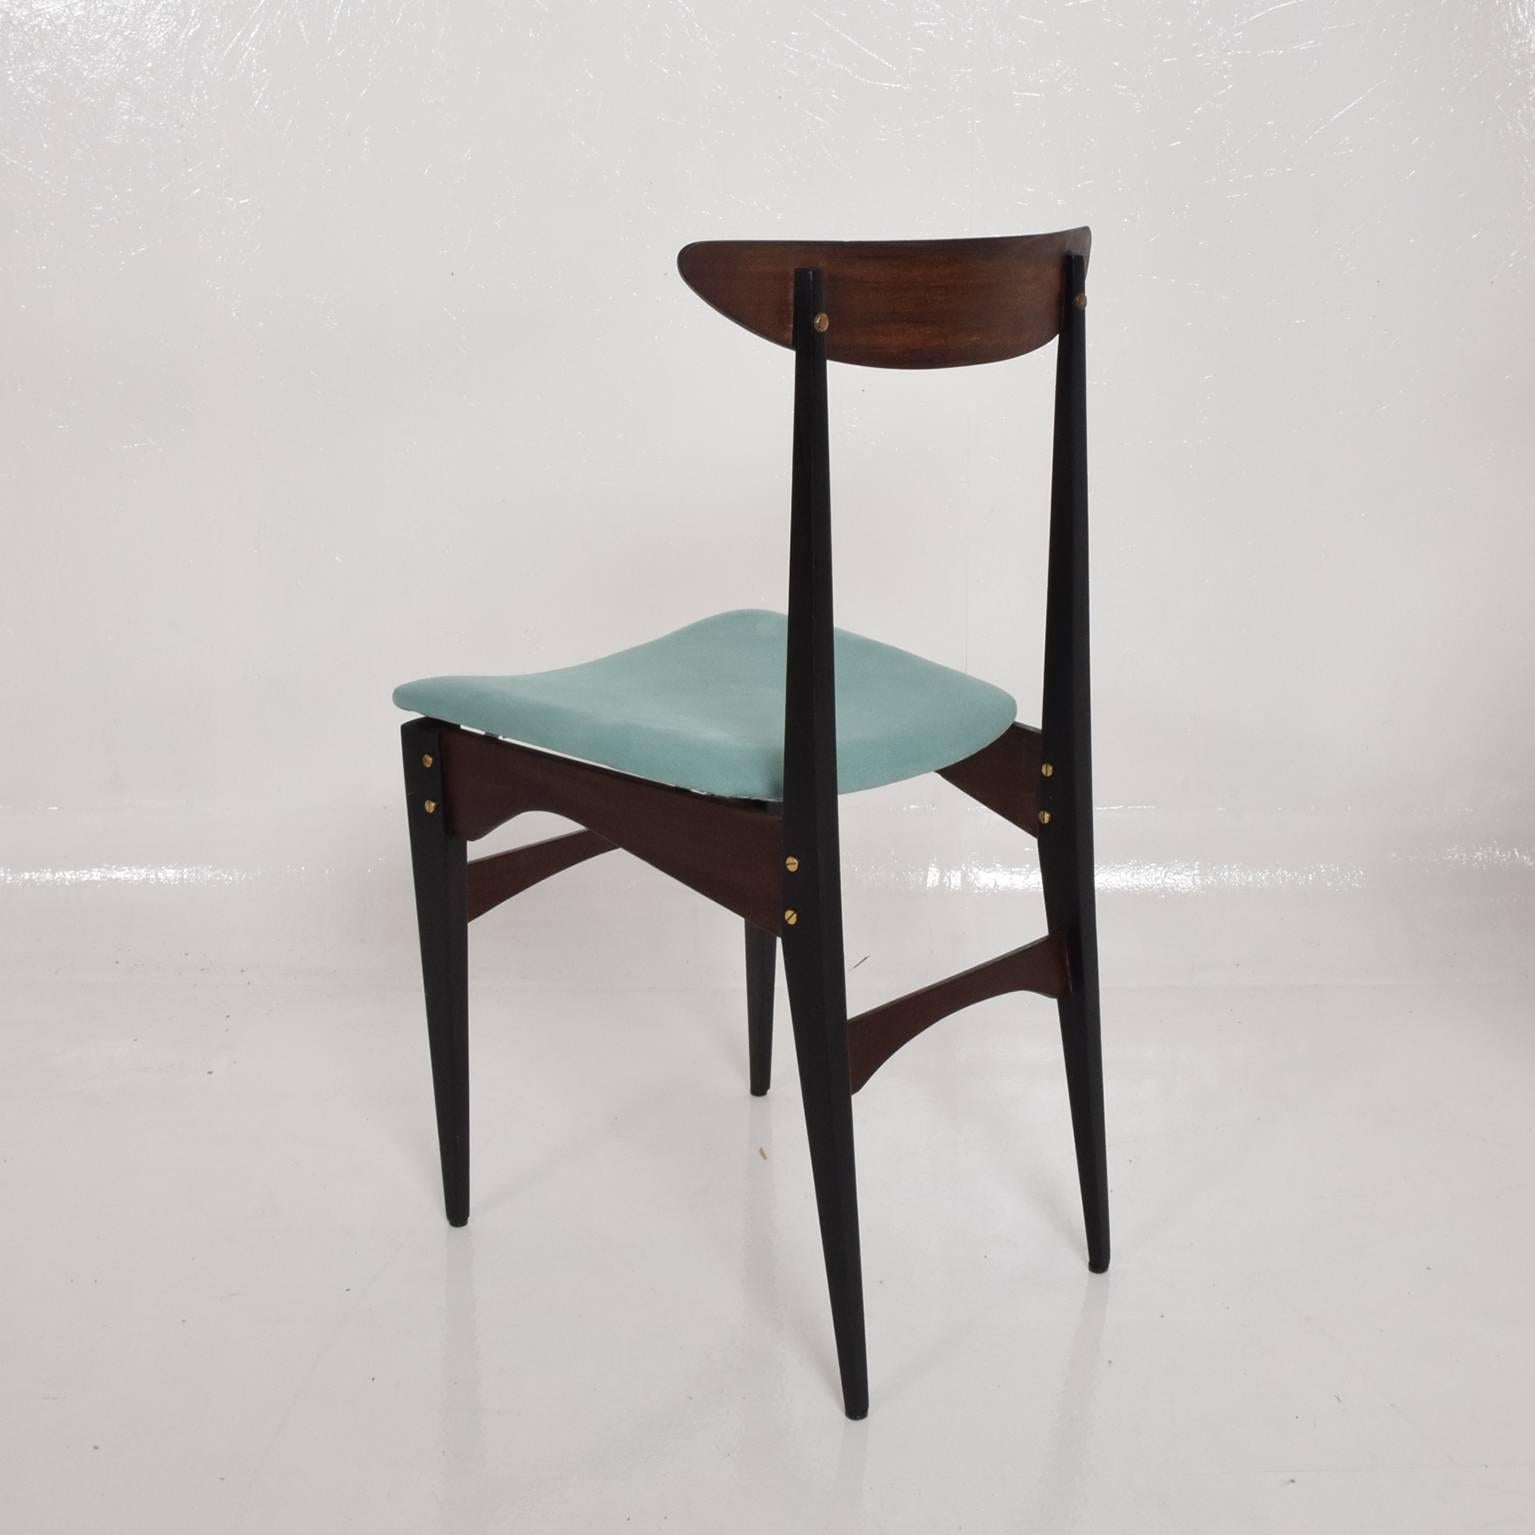 Mahogany Mid-Century Modern Italian Side Chair in The Style of Gio Ponti